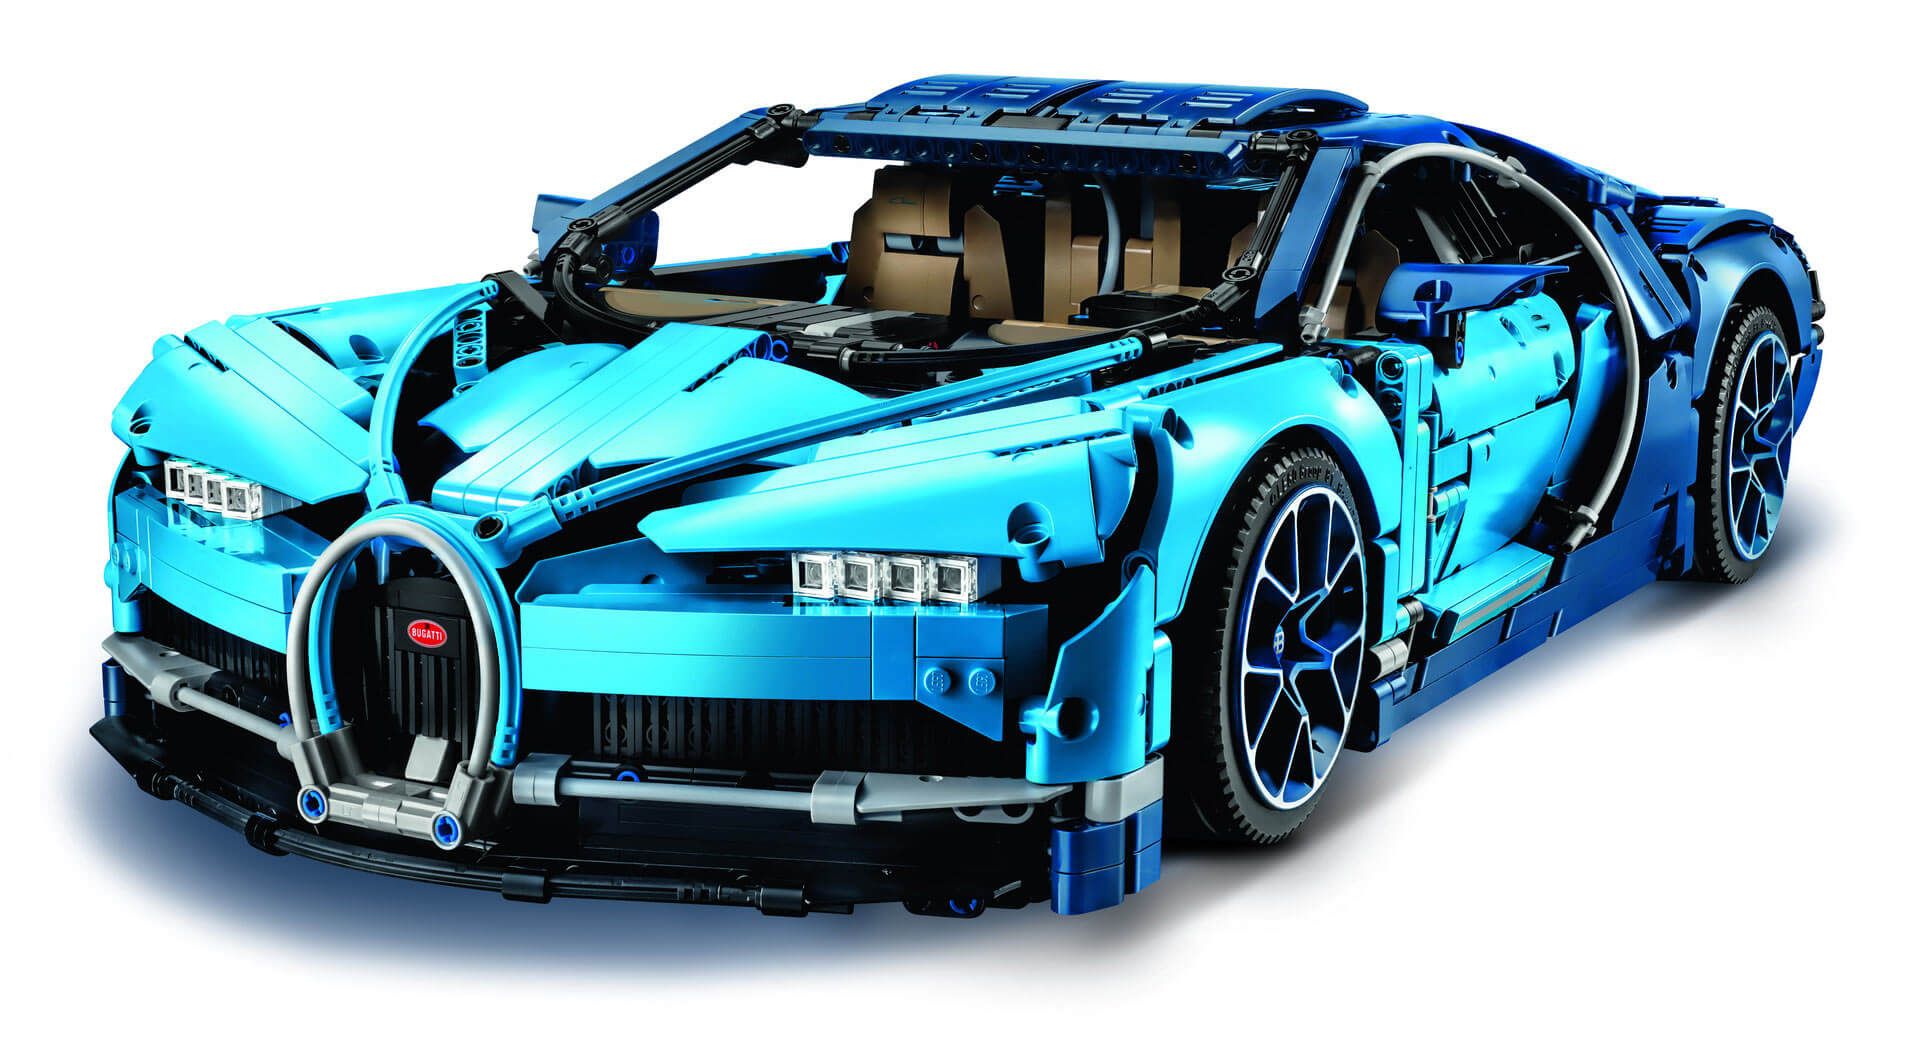 LEGO Technic's $350 Bugatti Chiron Is 3,600 Pieces Of Awesomeness |